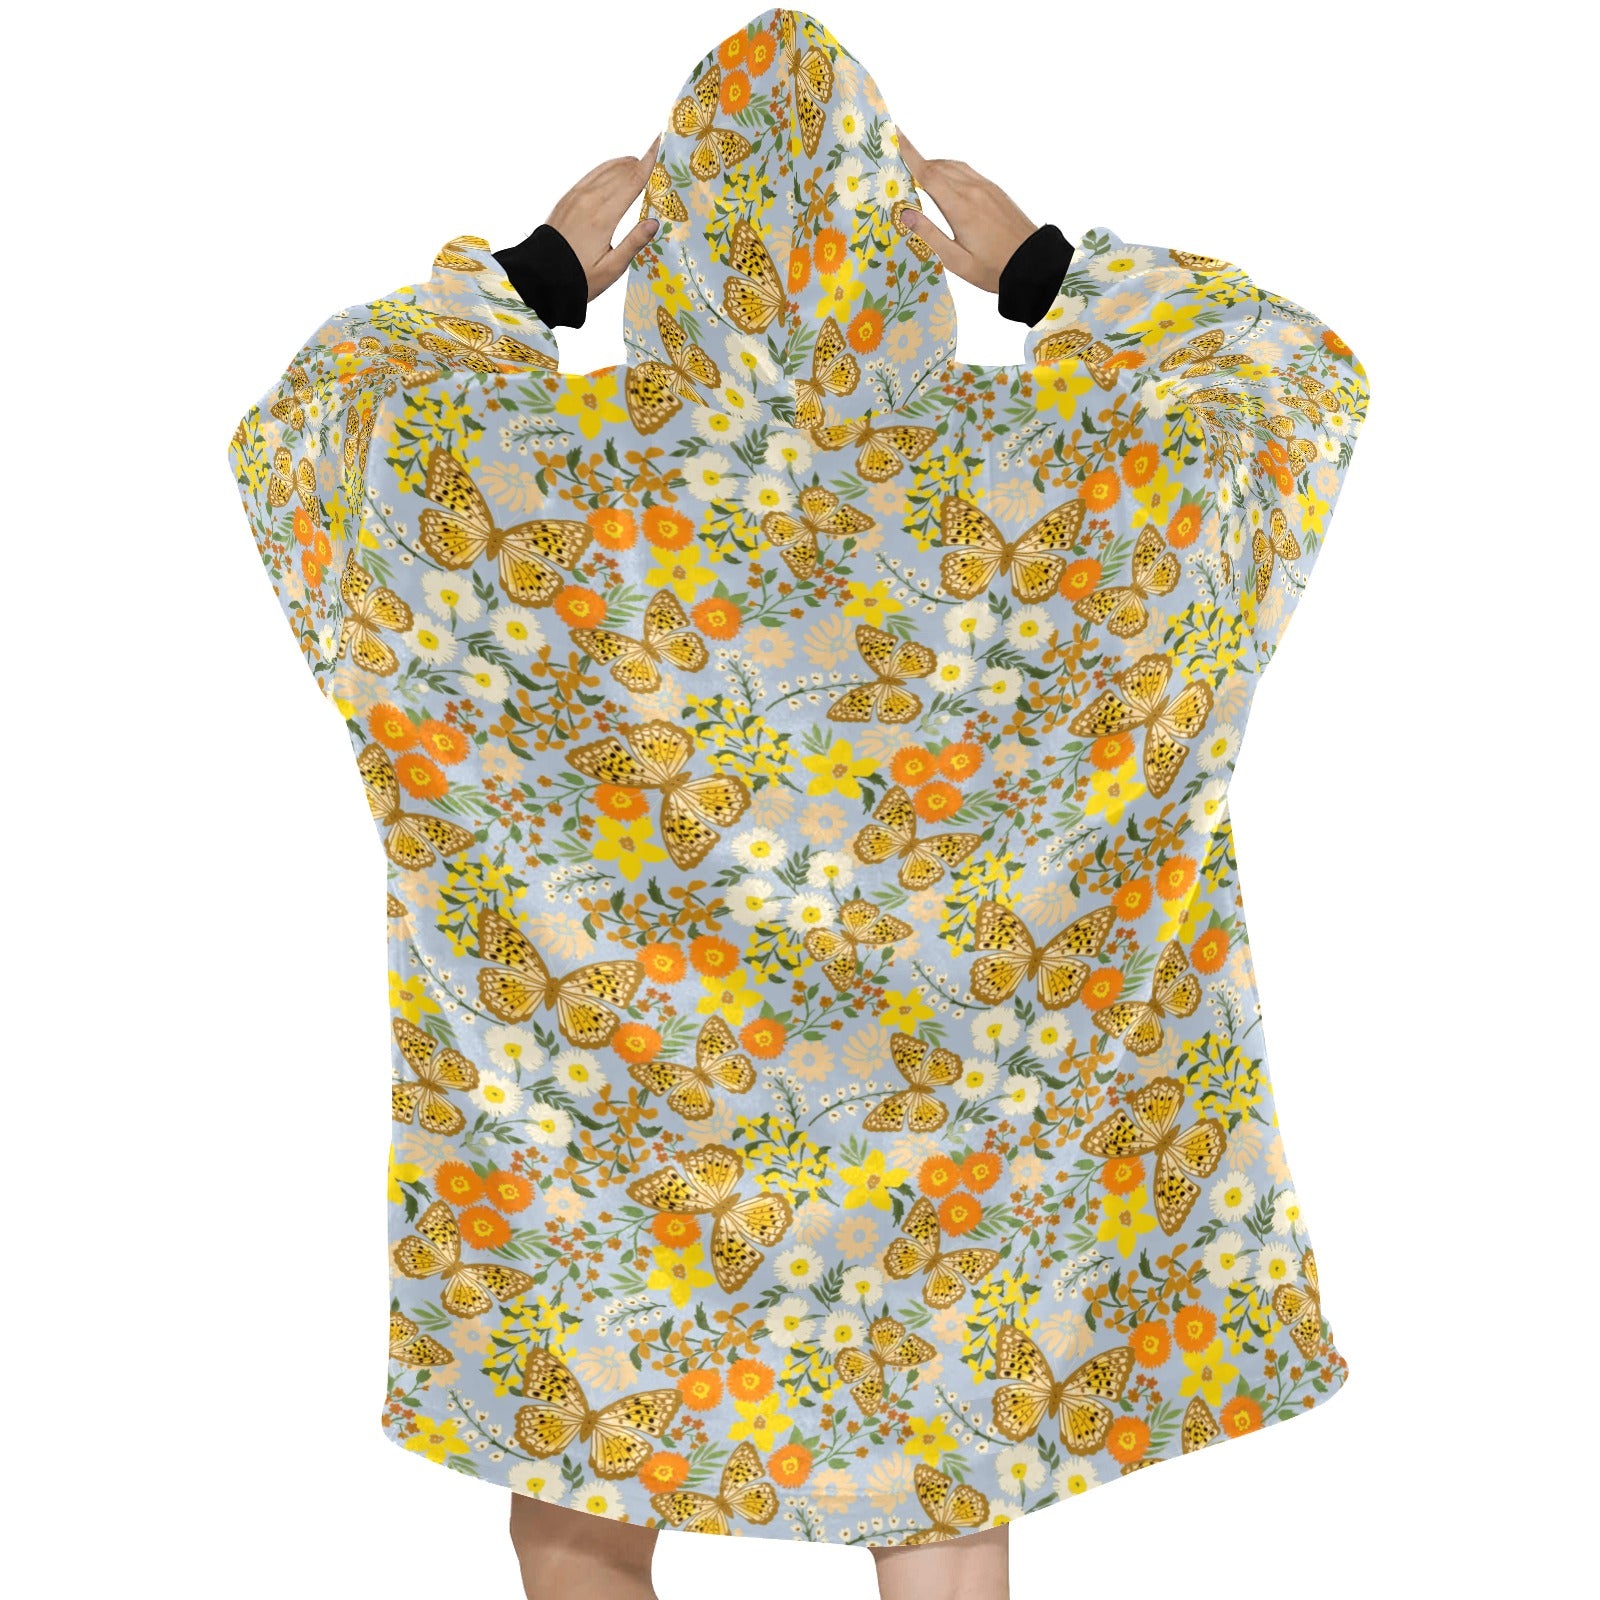 Wrap yourself in the beauty of a retro floral print with this cozy hooded fleece blanket.